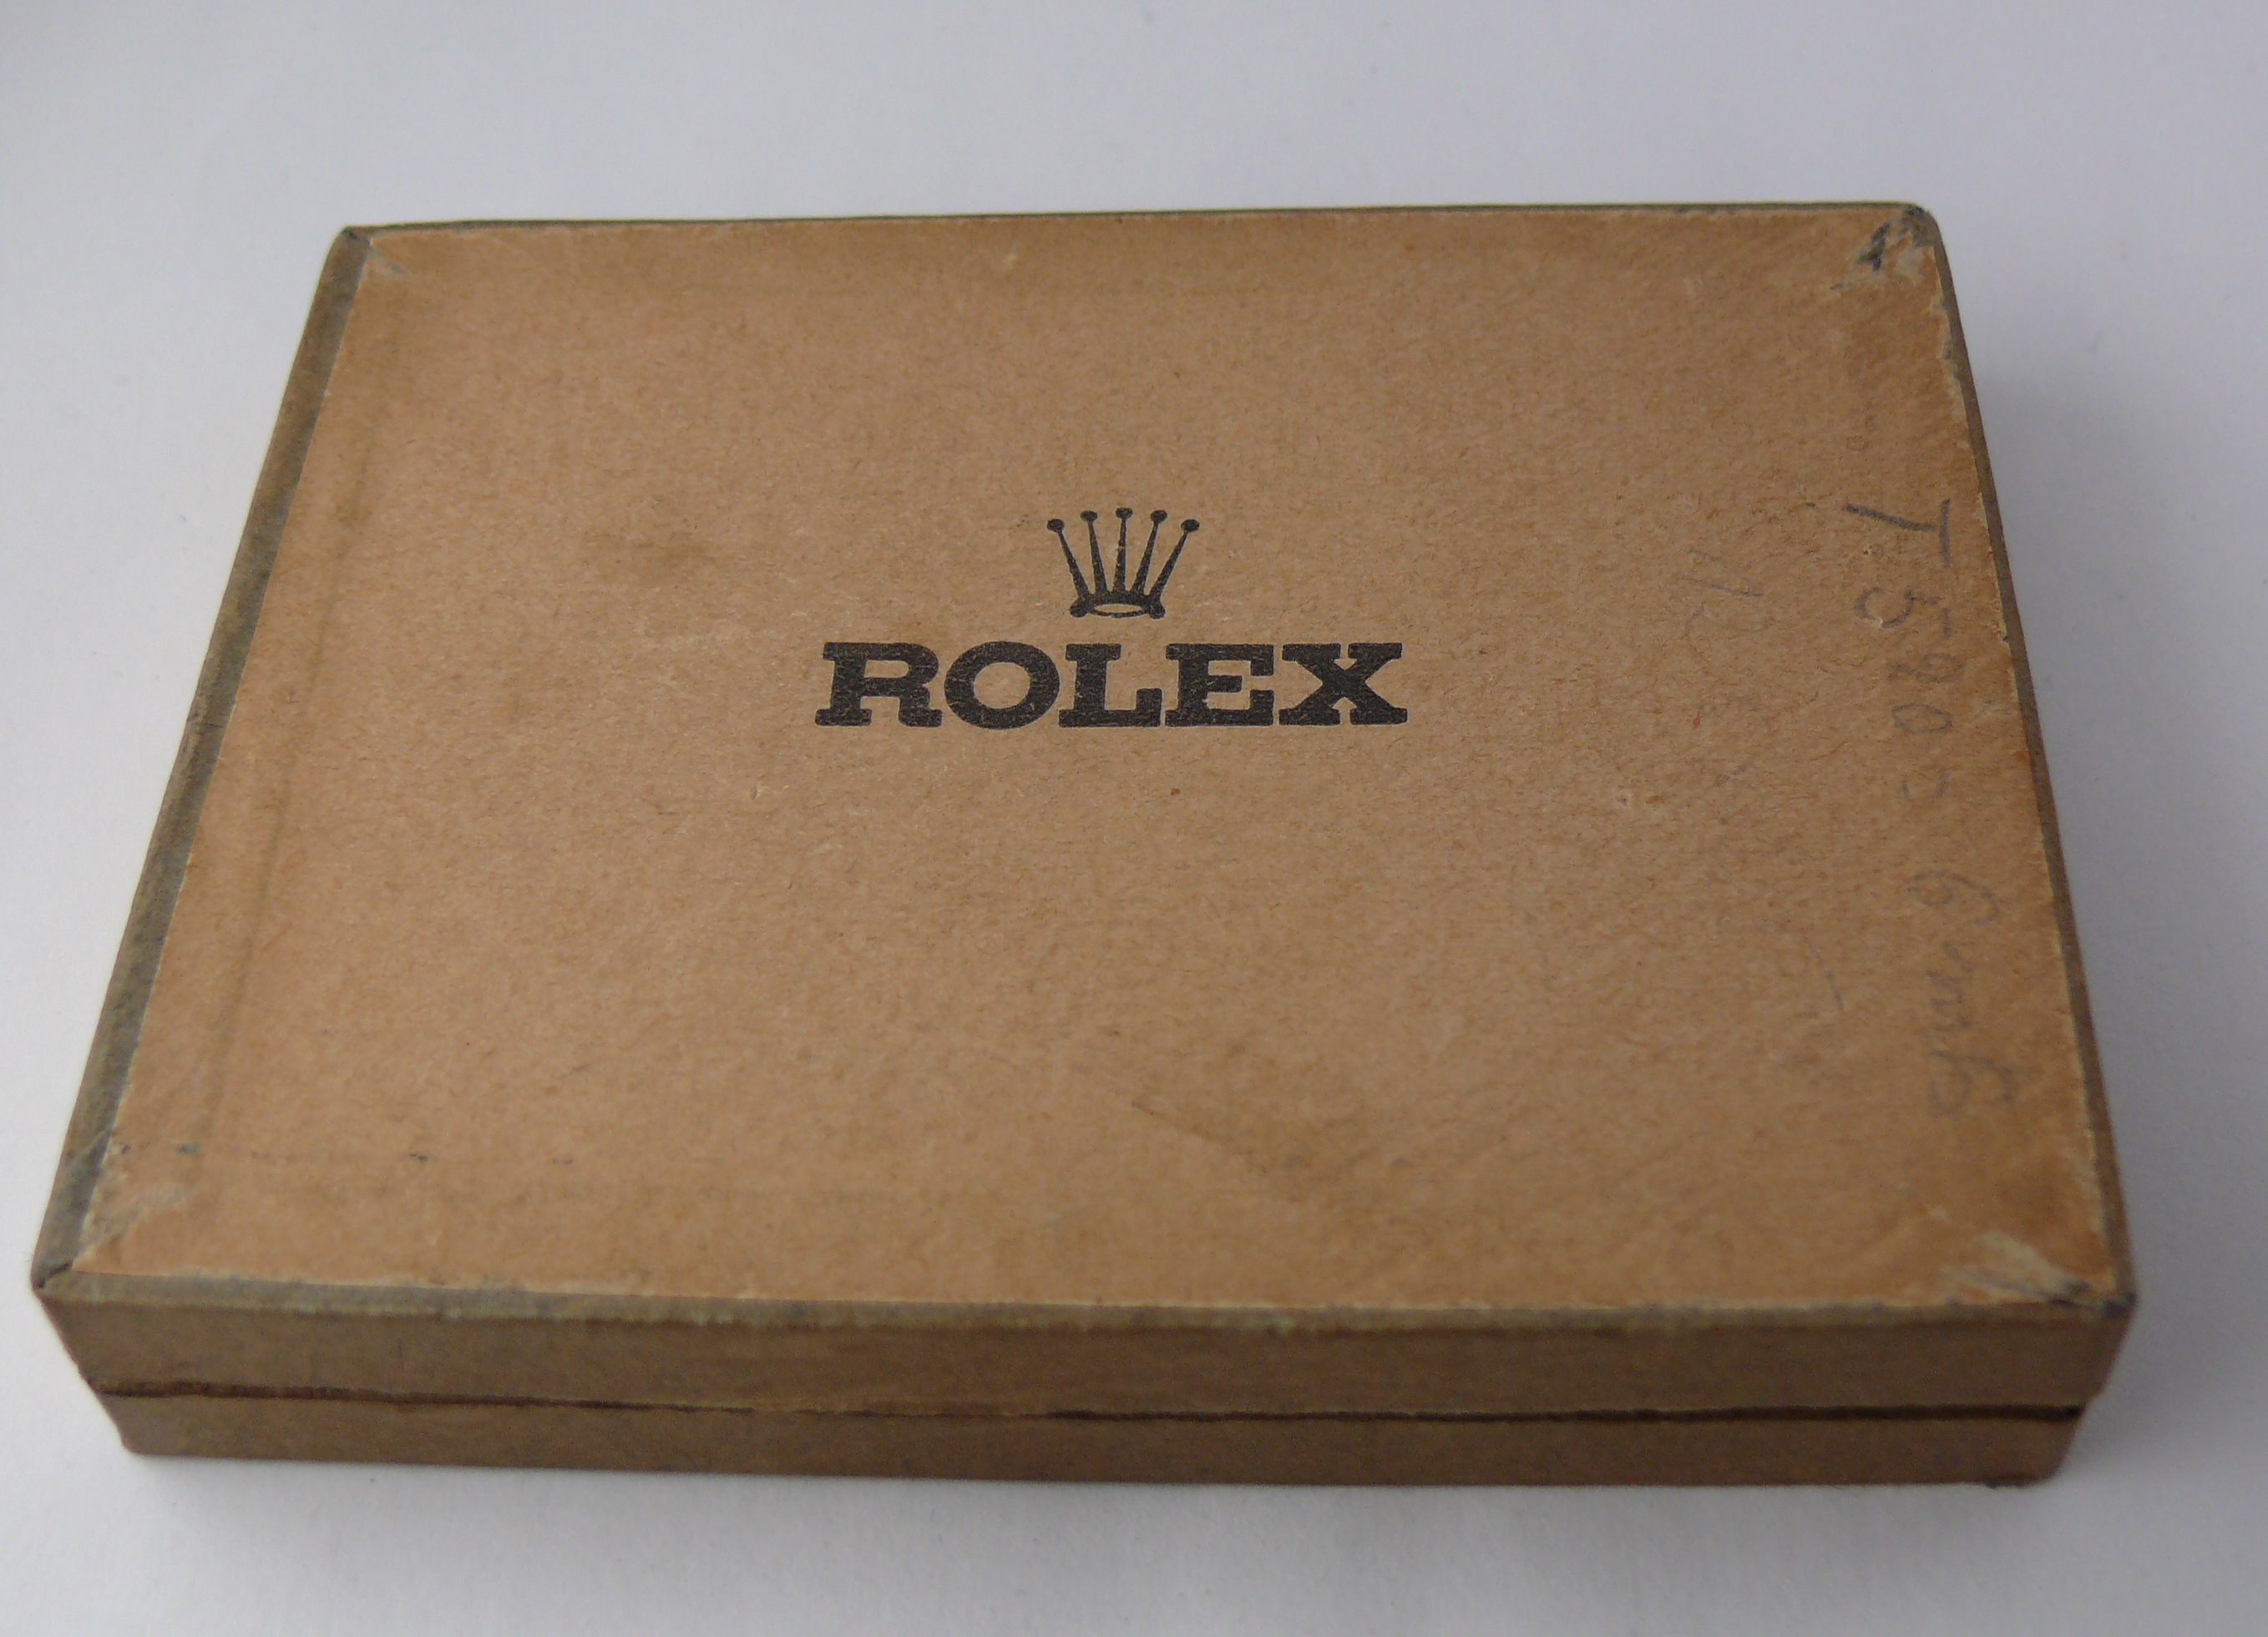 EARLY Vintage Rolex Parts Box. Please note this box is in clean and fair condition.